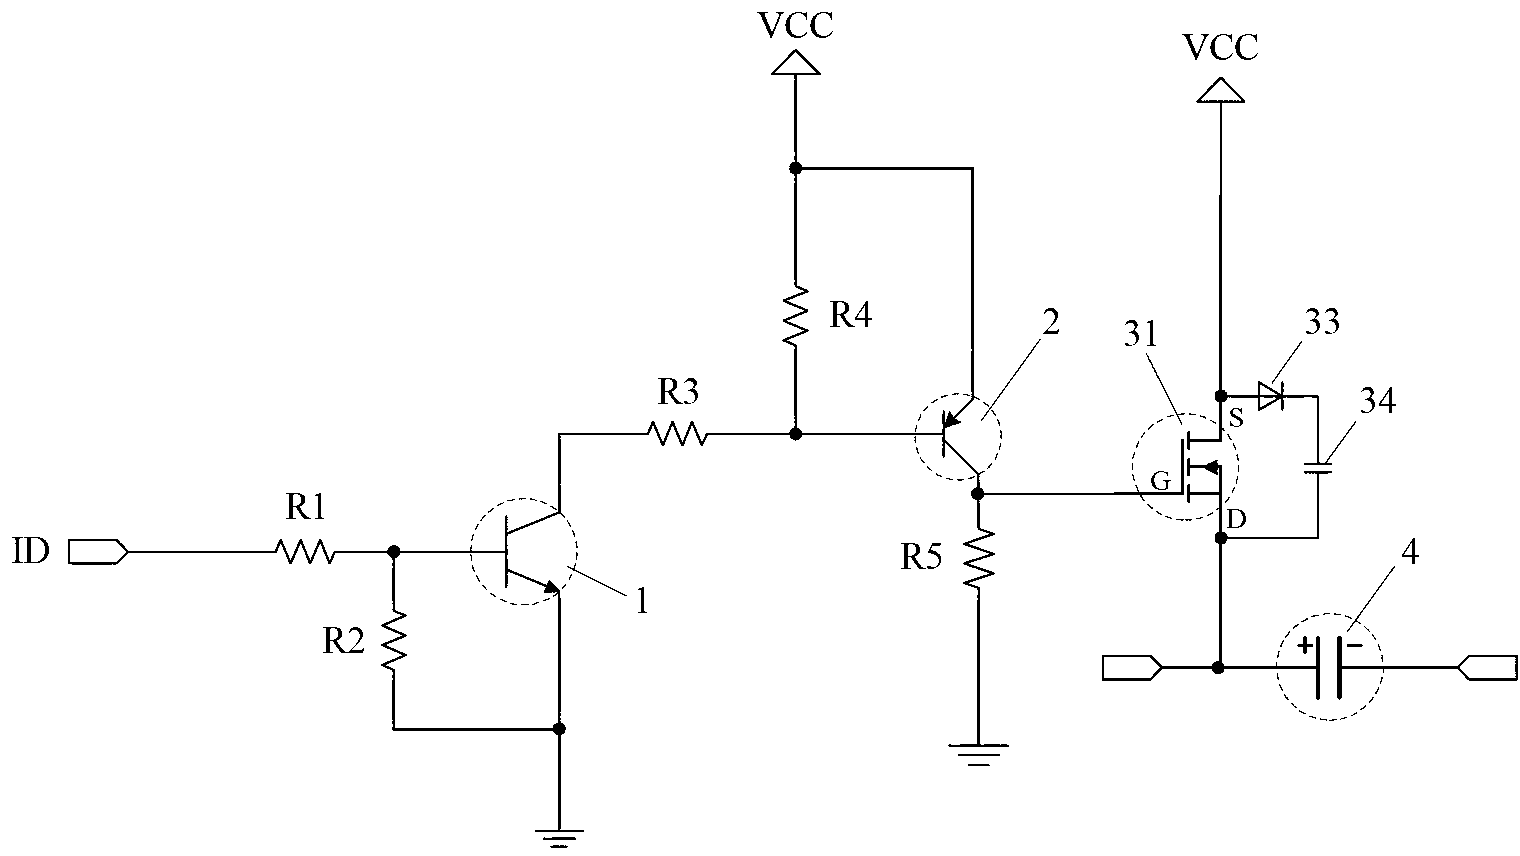 Battery power equalization circuit